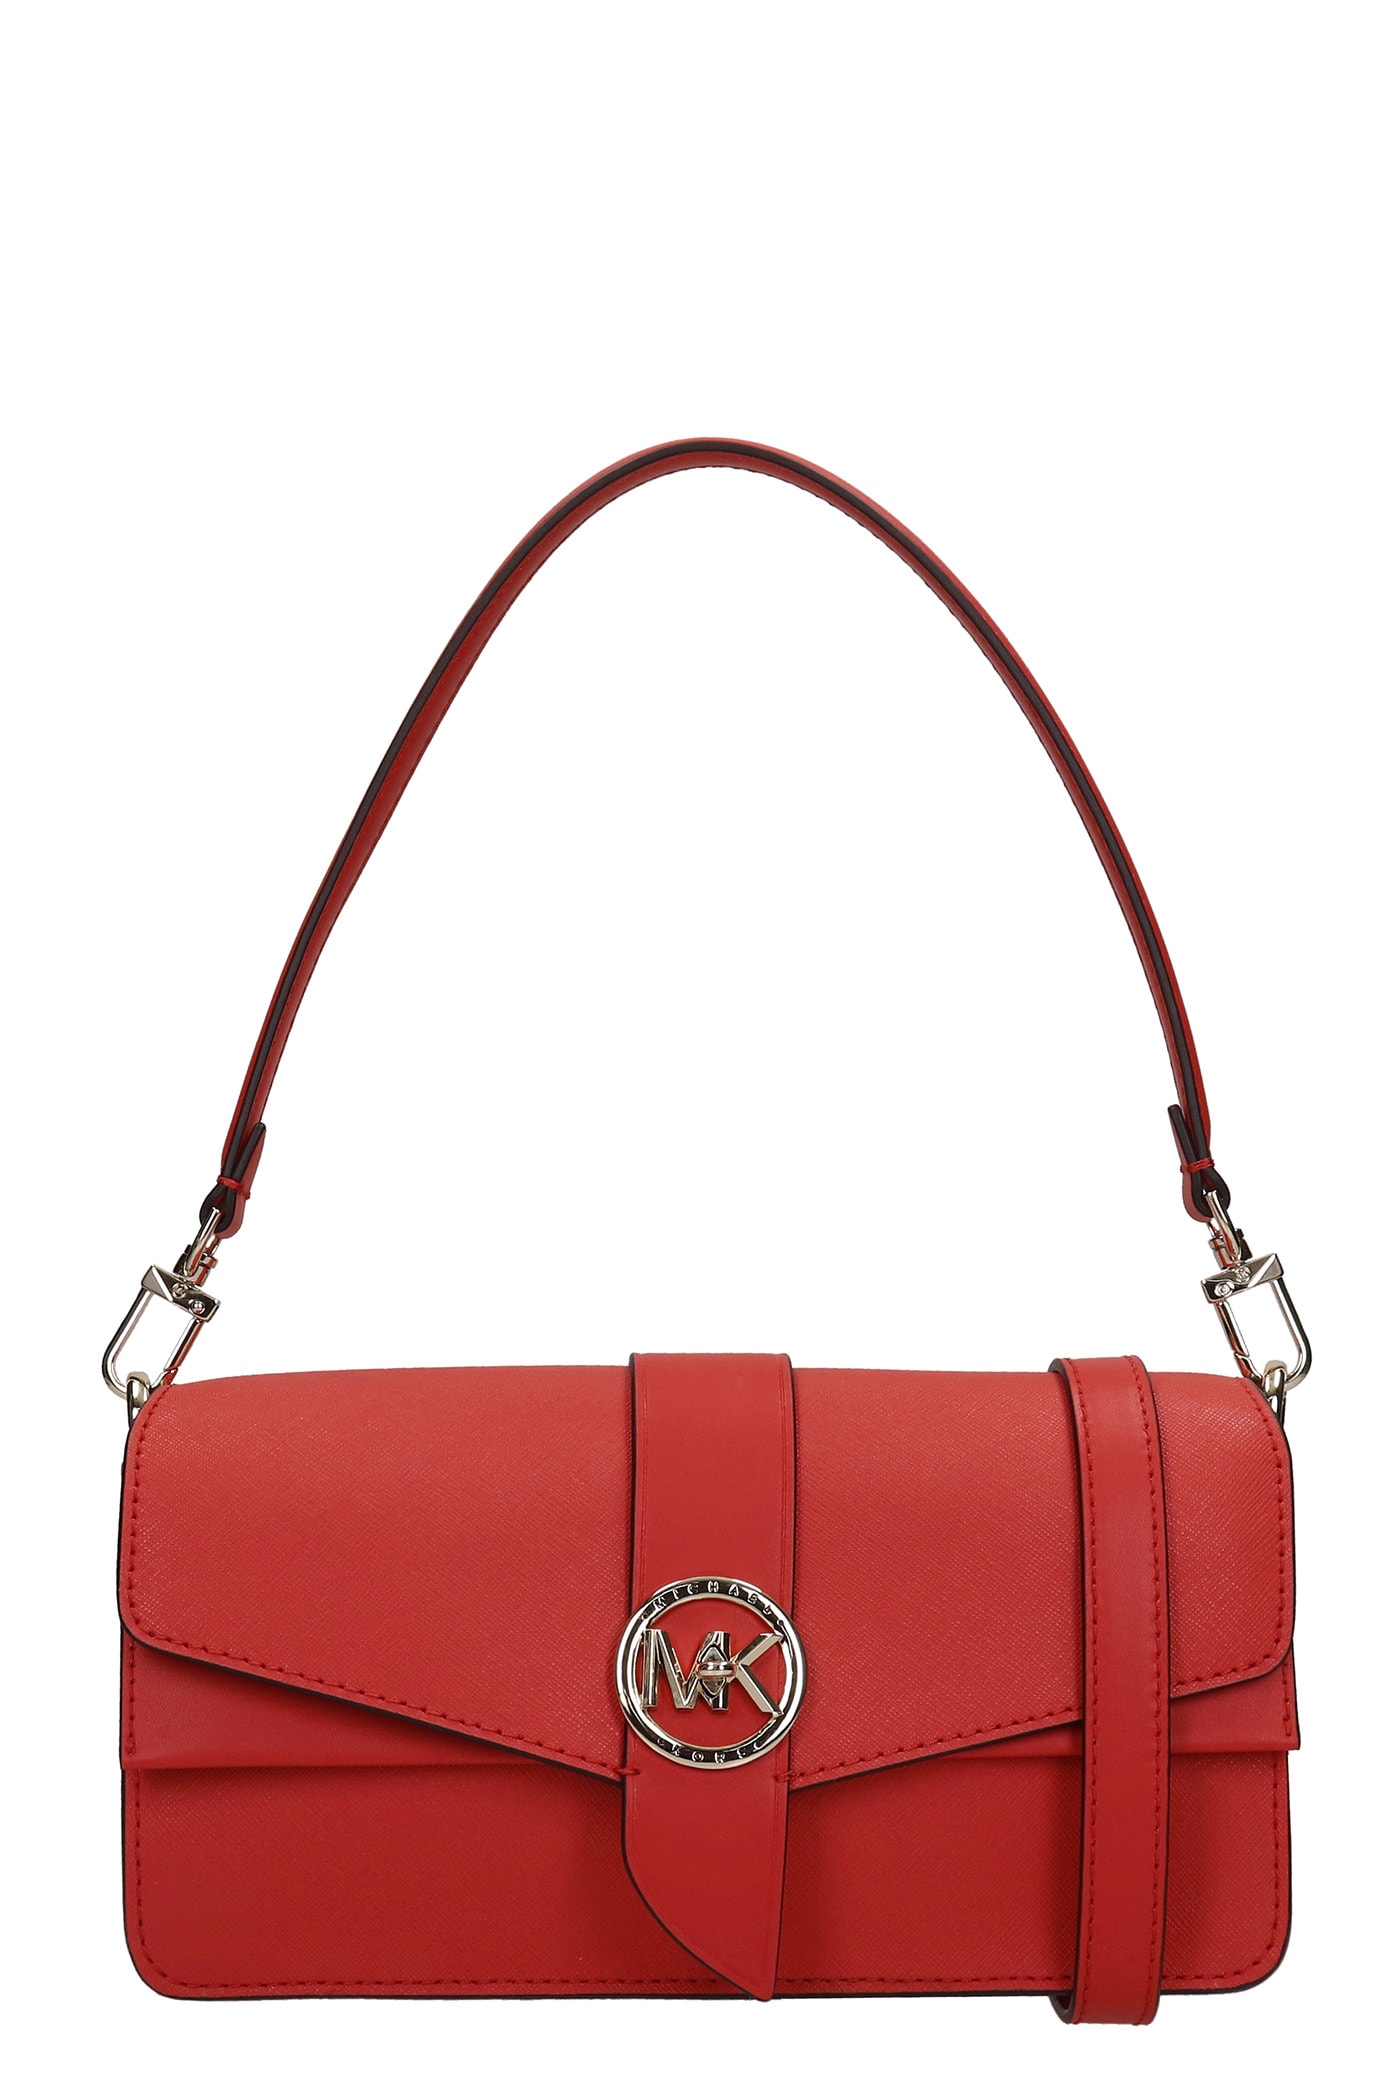 Michael Kors Greenwich Shoulder Bag In Red Leather